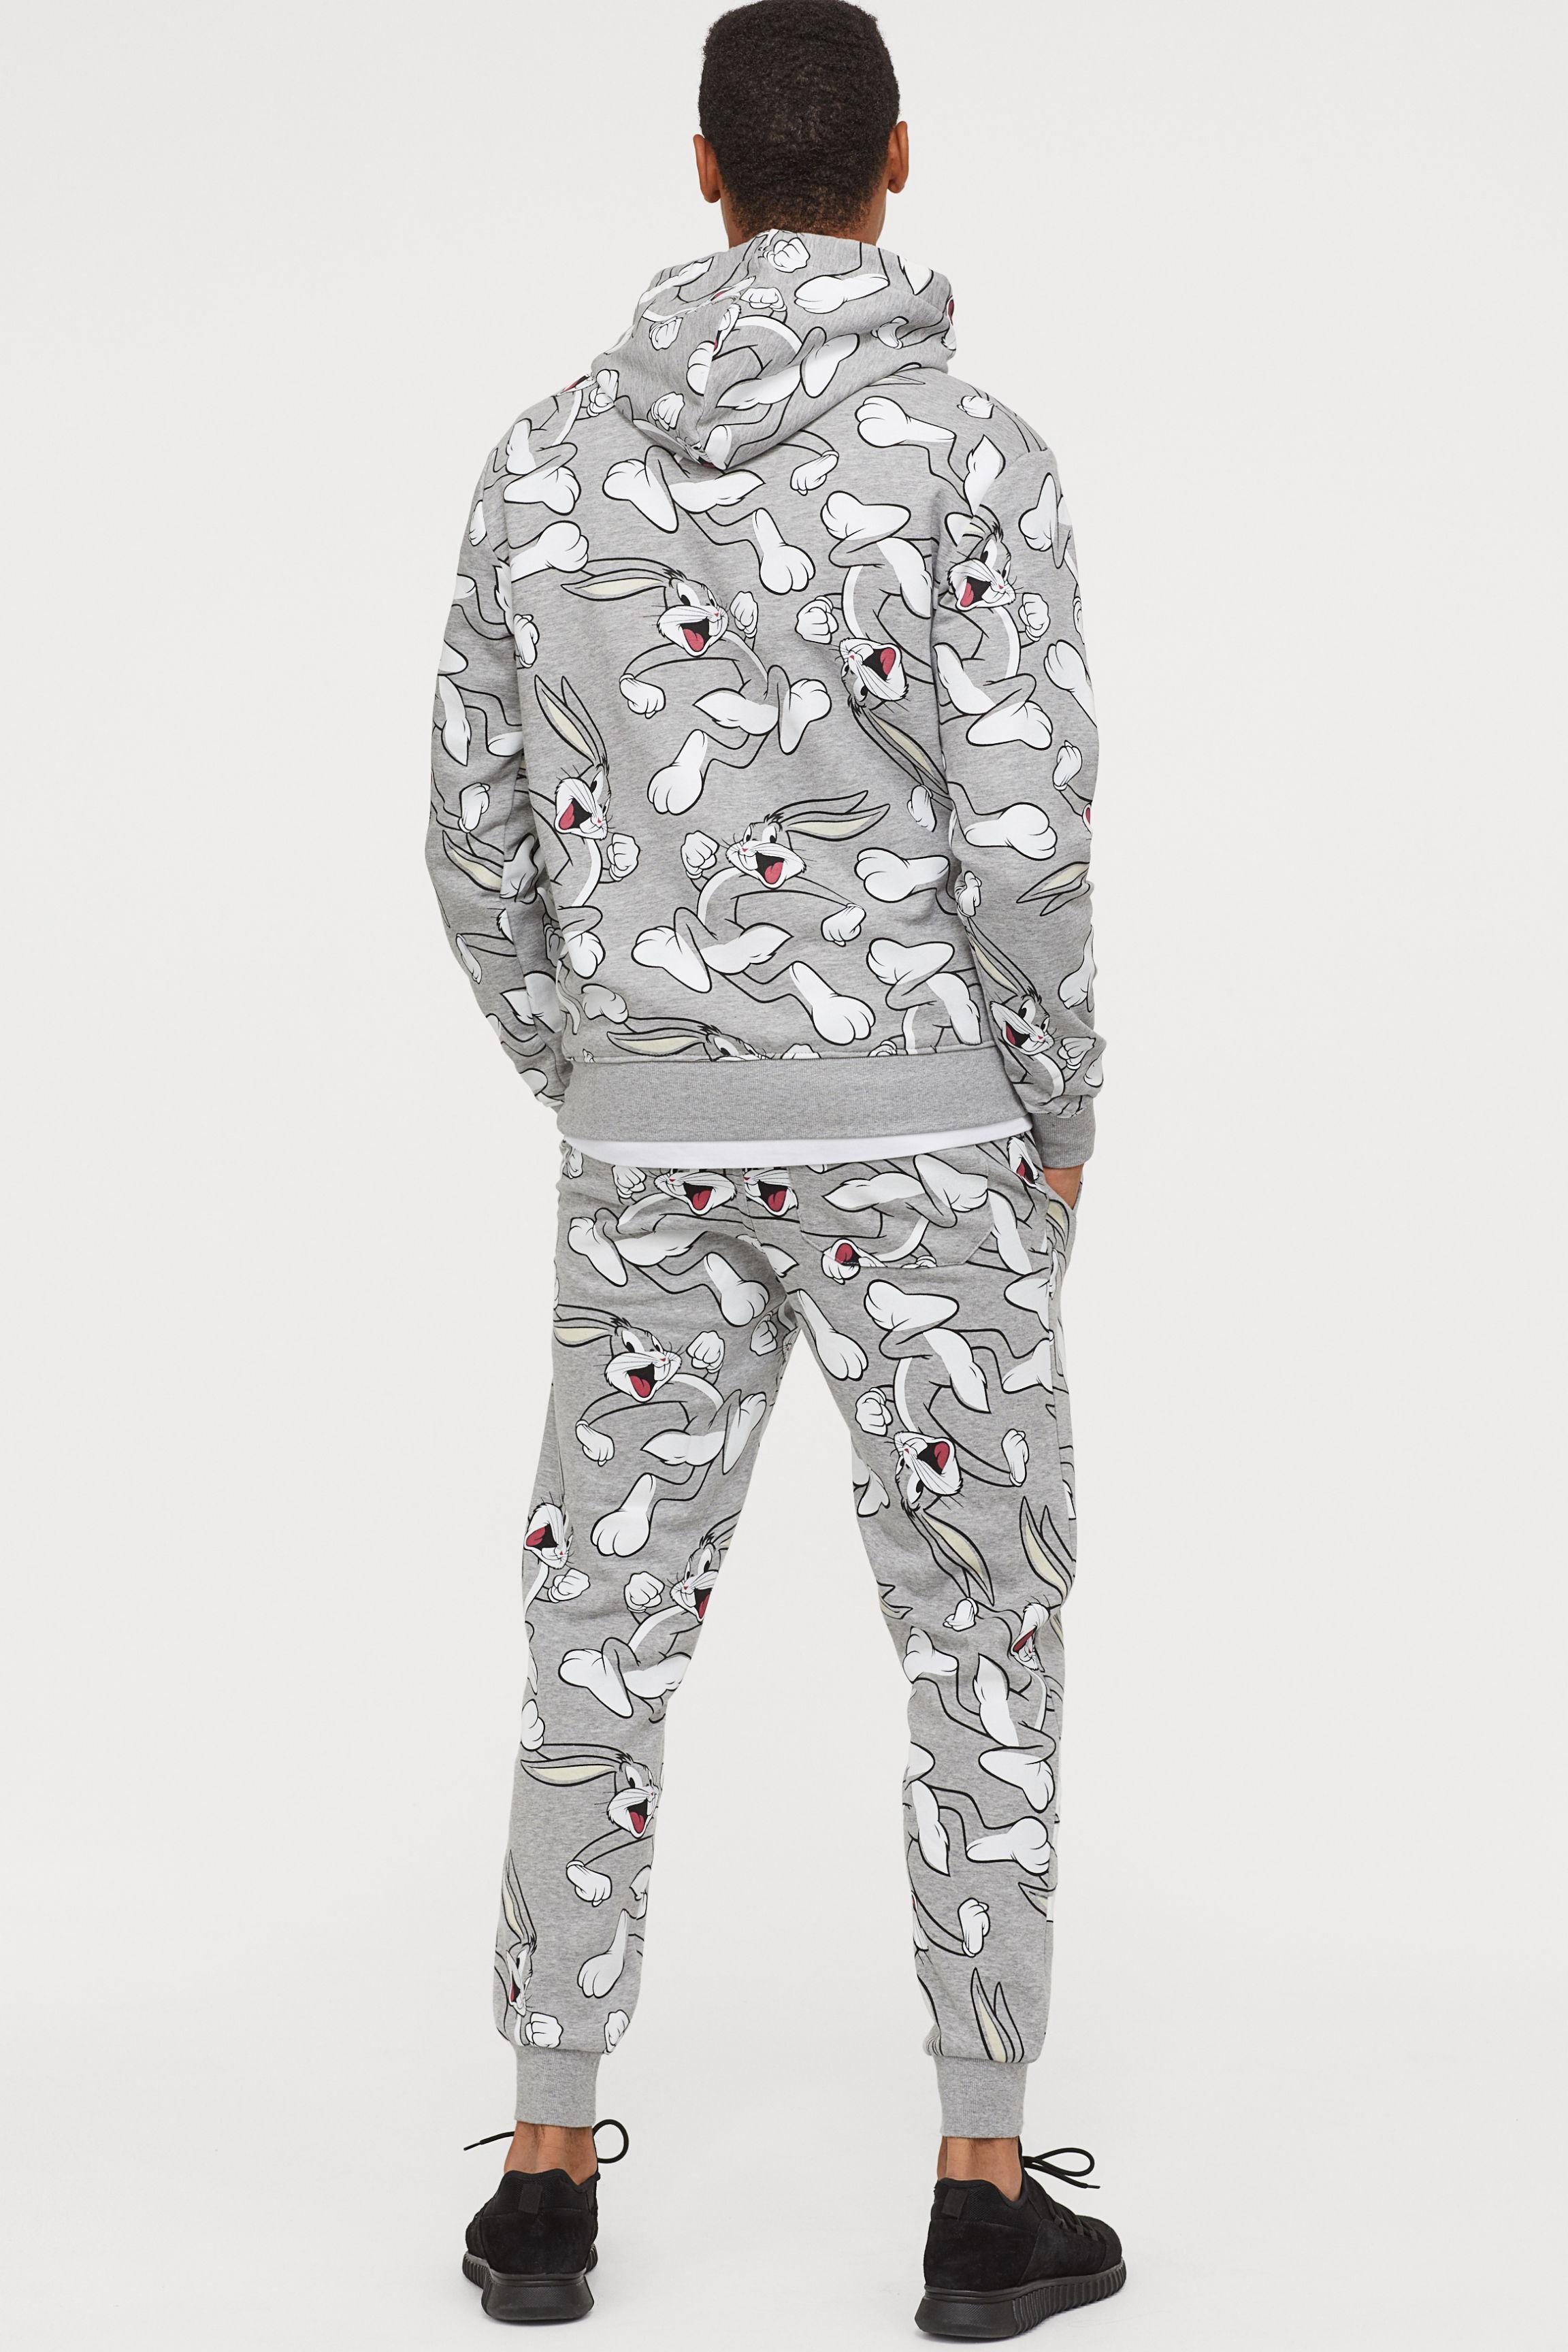 H&m Bugs Bunny Joggers Hot Sale, UP TO 70% OFF | www.realliganaval.com